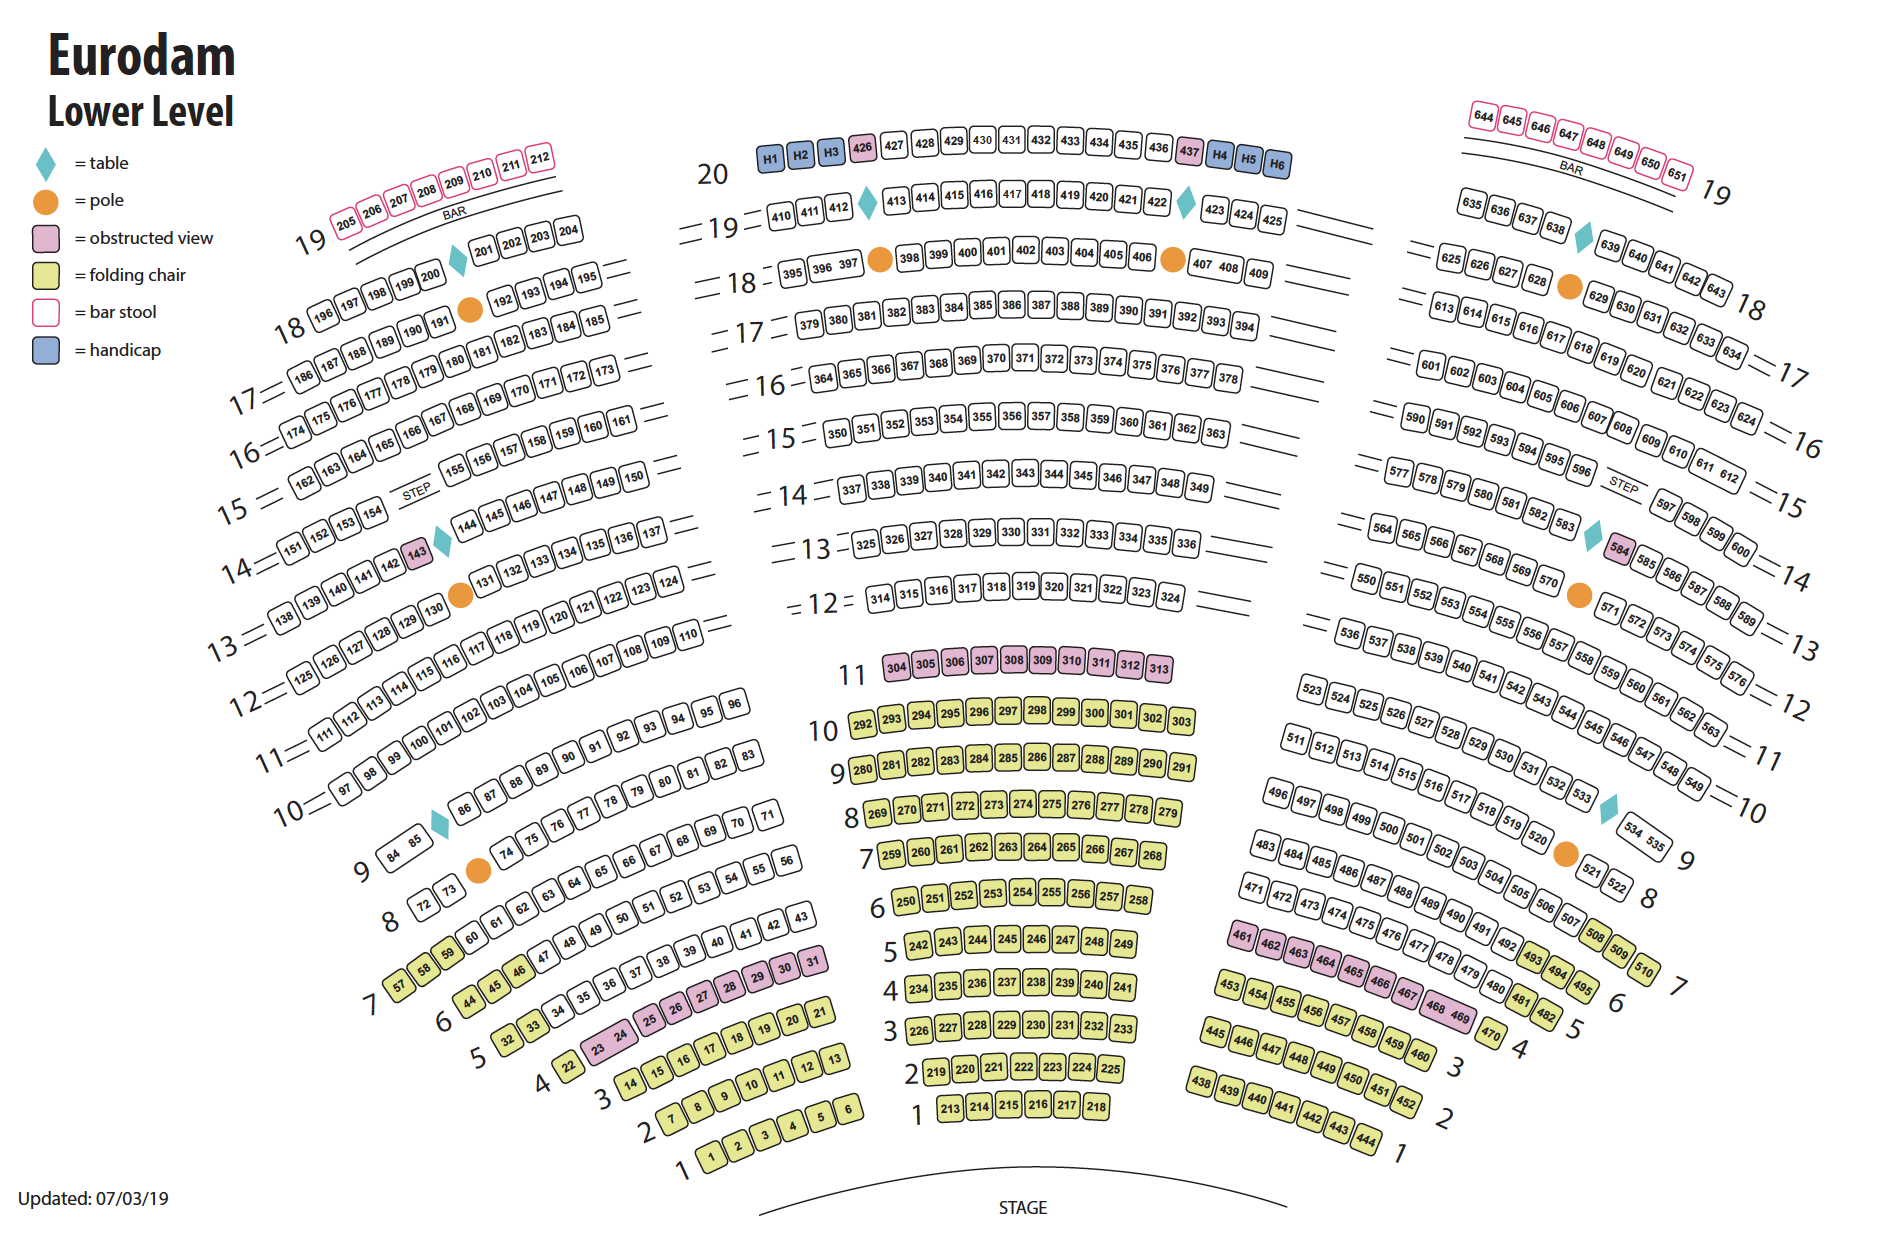 Coaster Theater Seating Chart